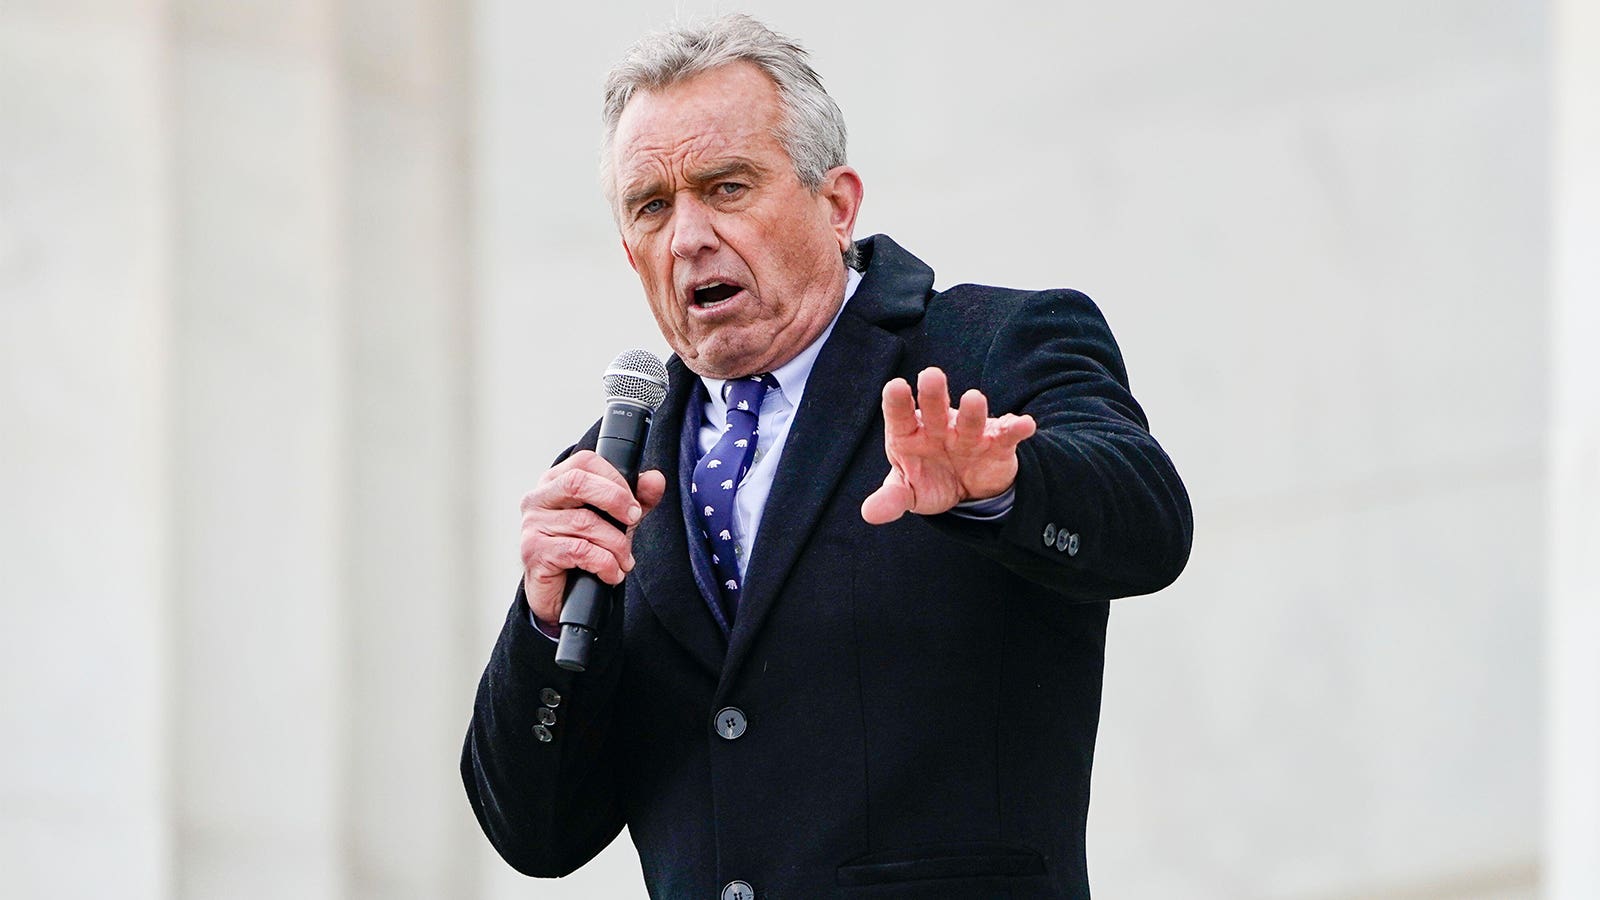 RFK Jr. Explains Why His Voice Sounds Hoarse